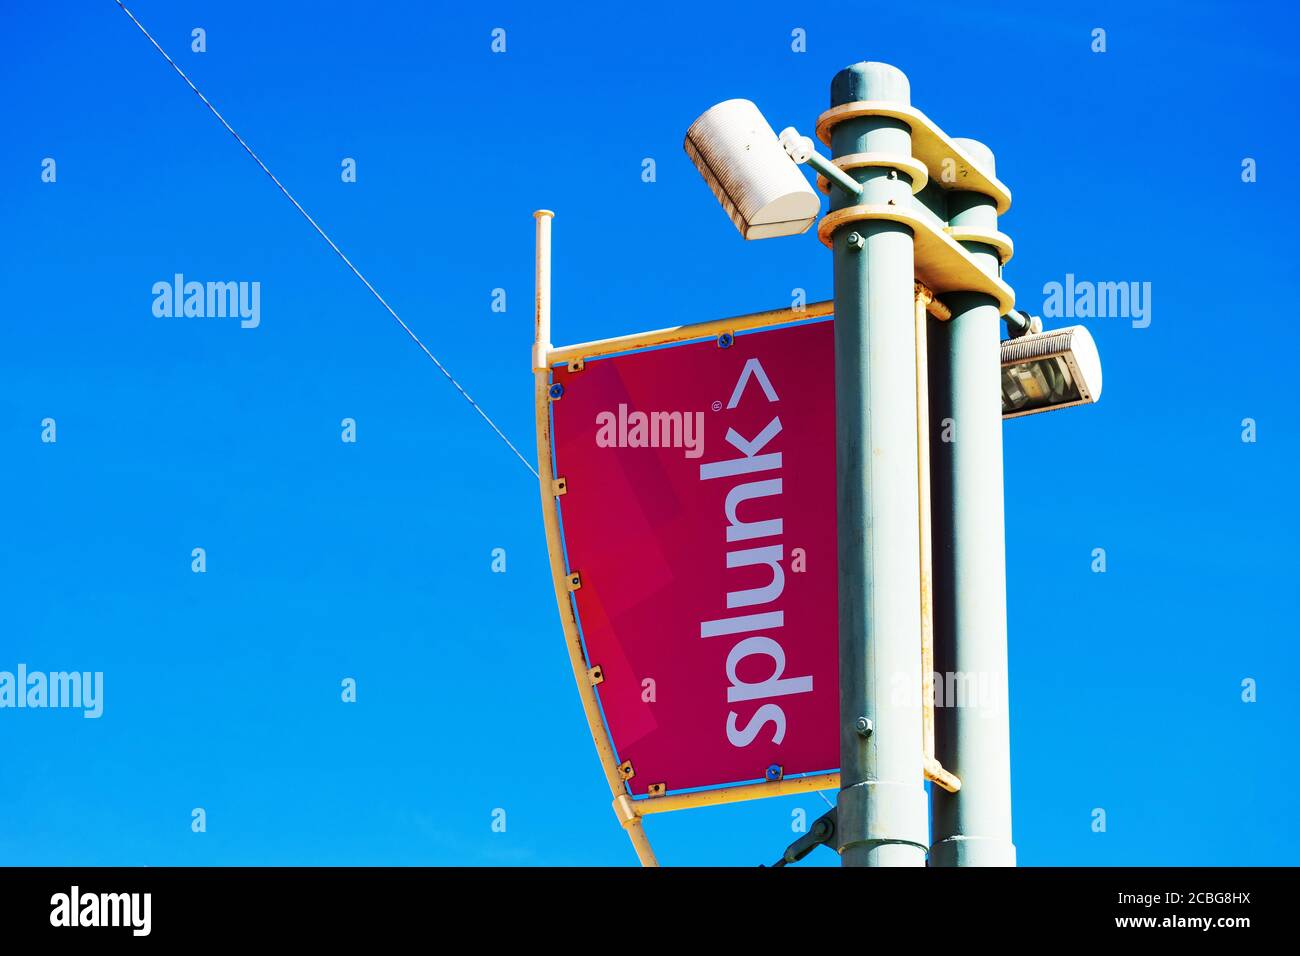 Splunk sign and logo on outdoor signpost. Splunk Inc produces software for searching, monitoring, and analyzing machine-generated big data - San Franc Stock Photo